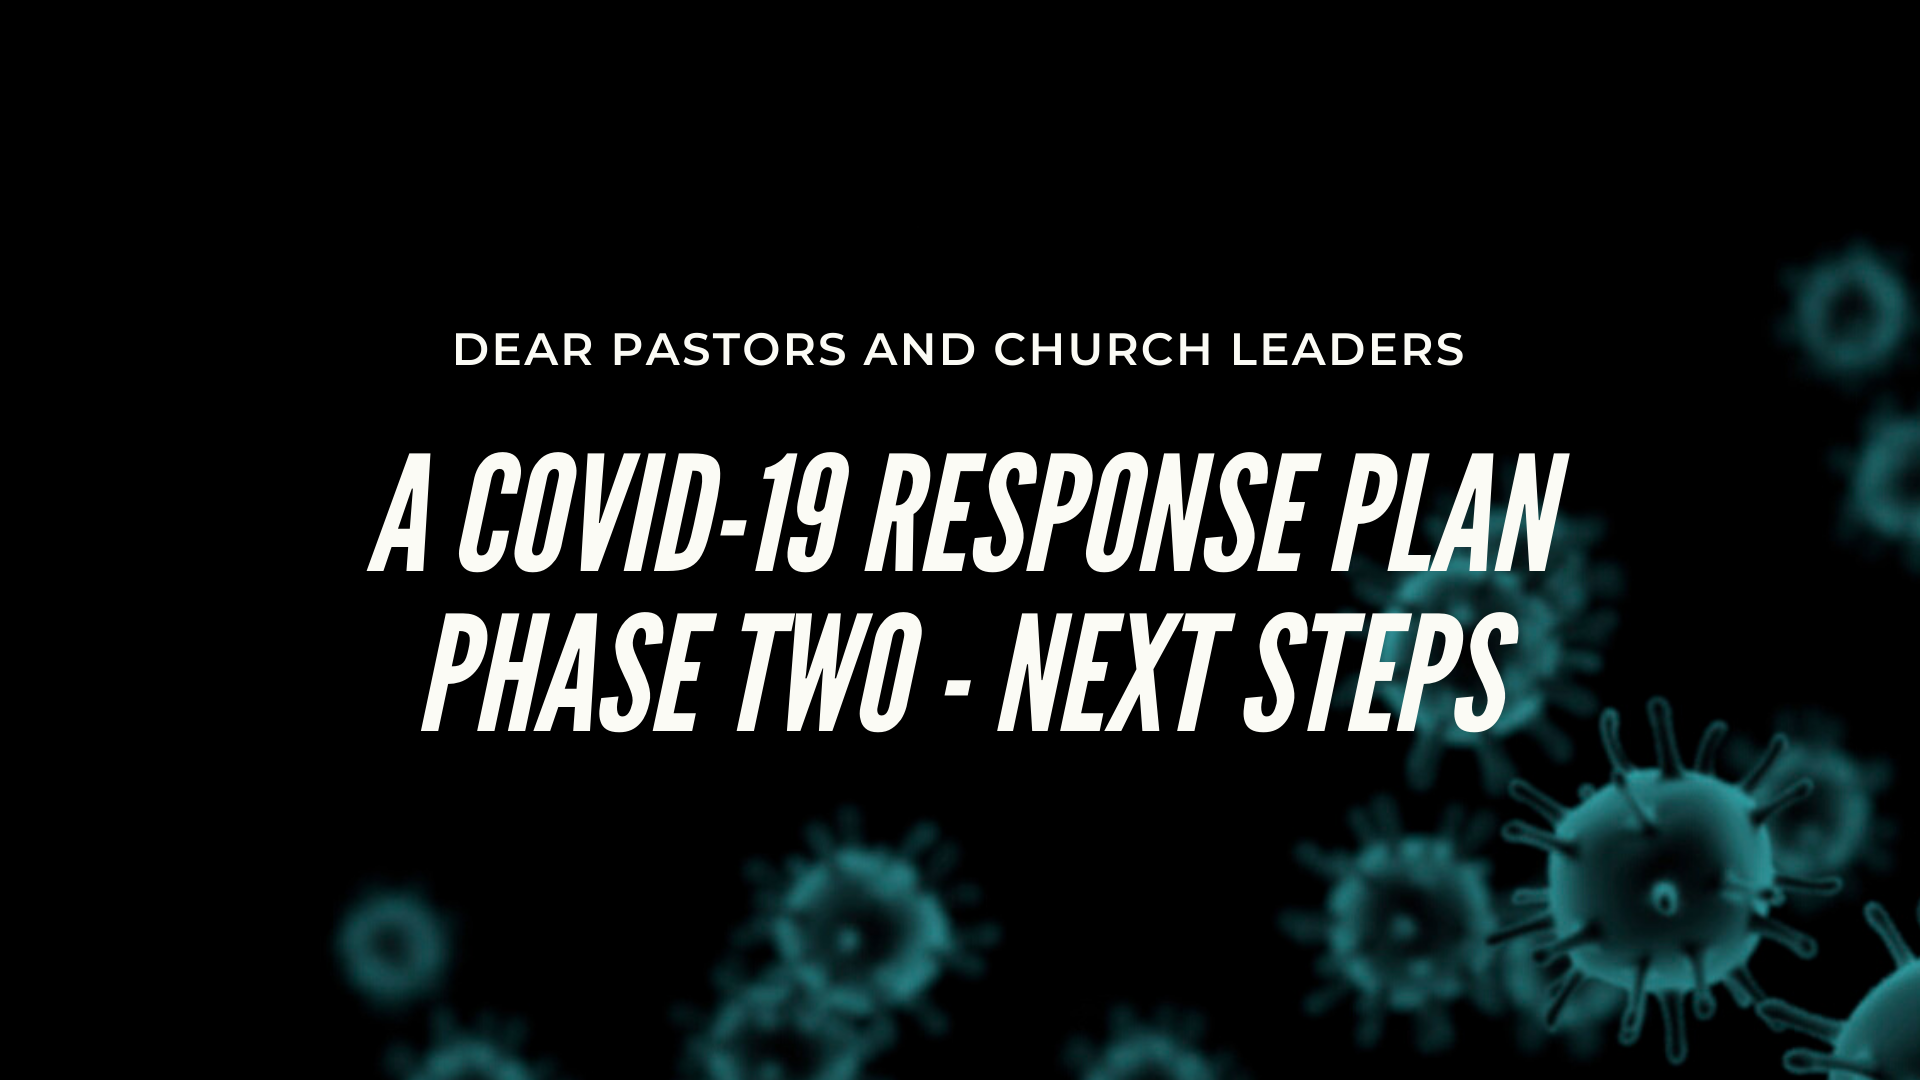 COVID-19 Phase Two: Next Steps